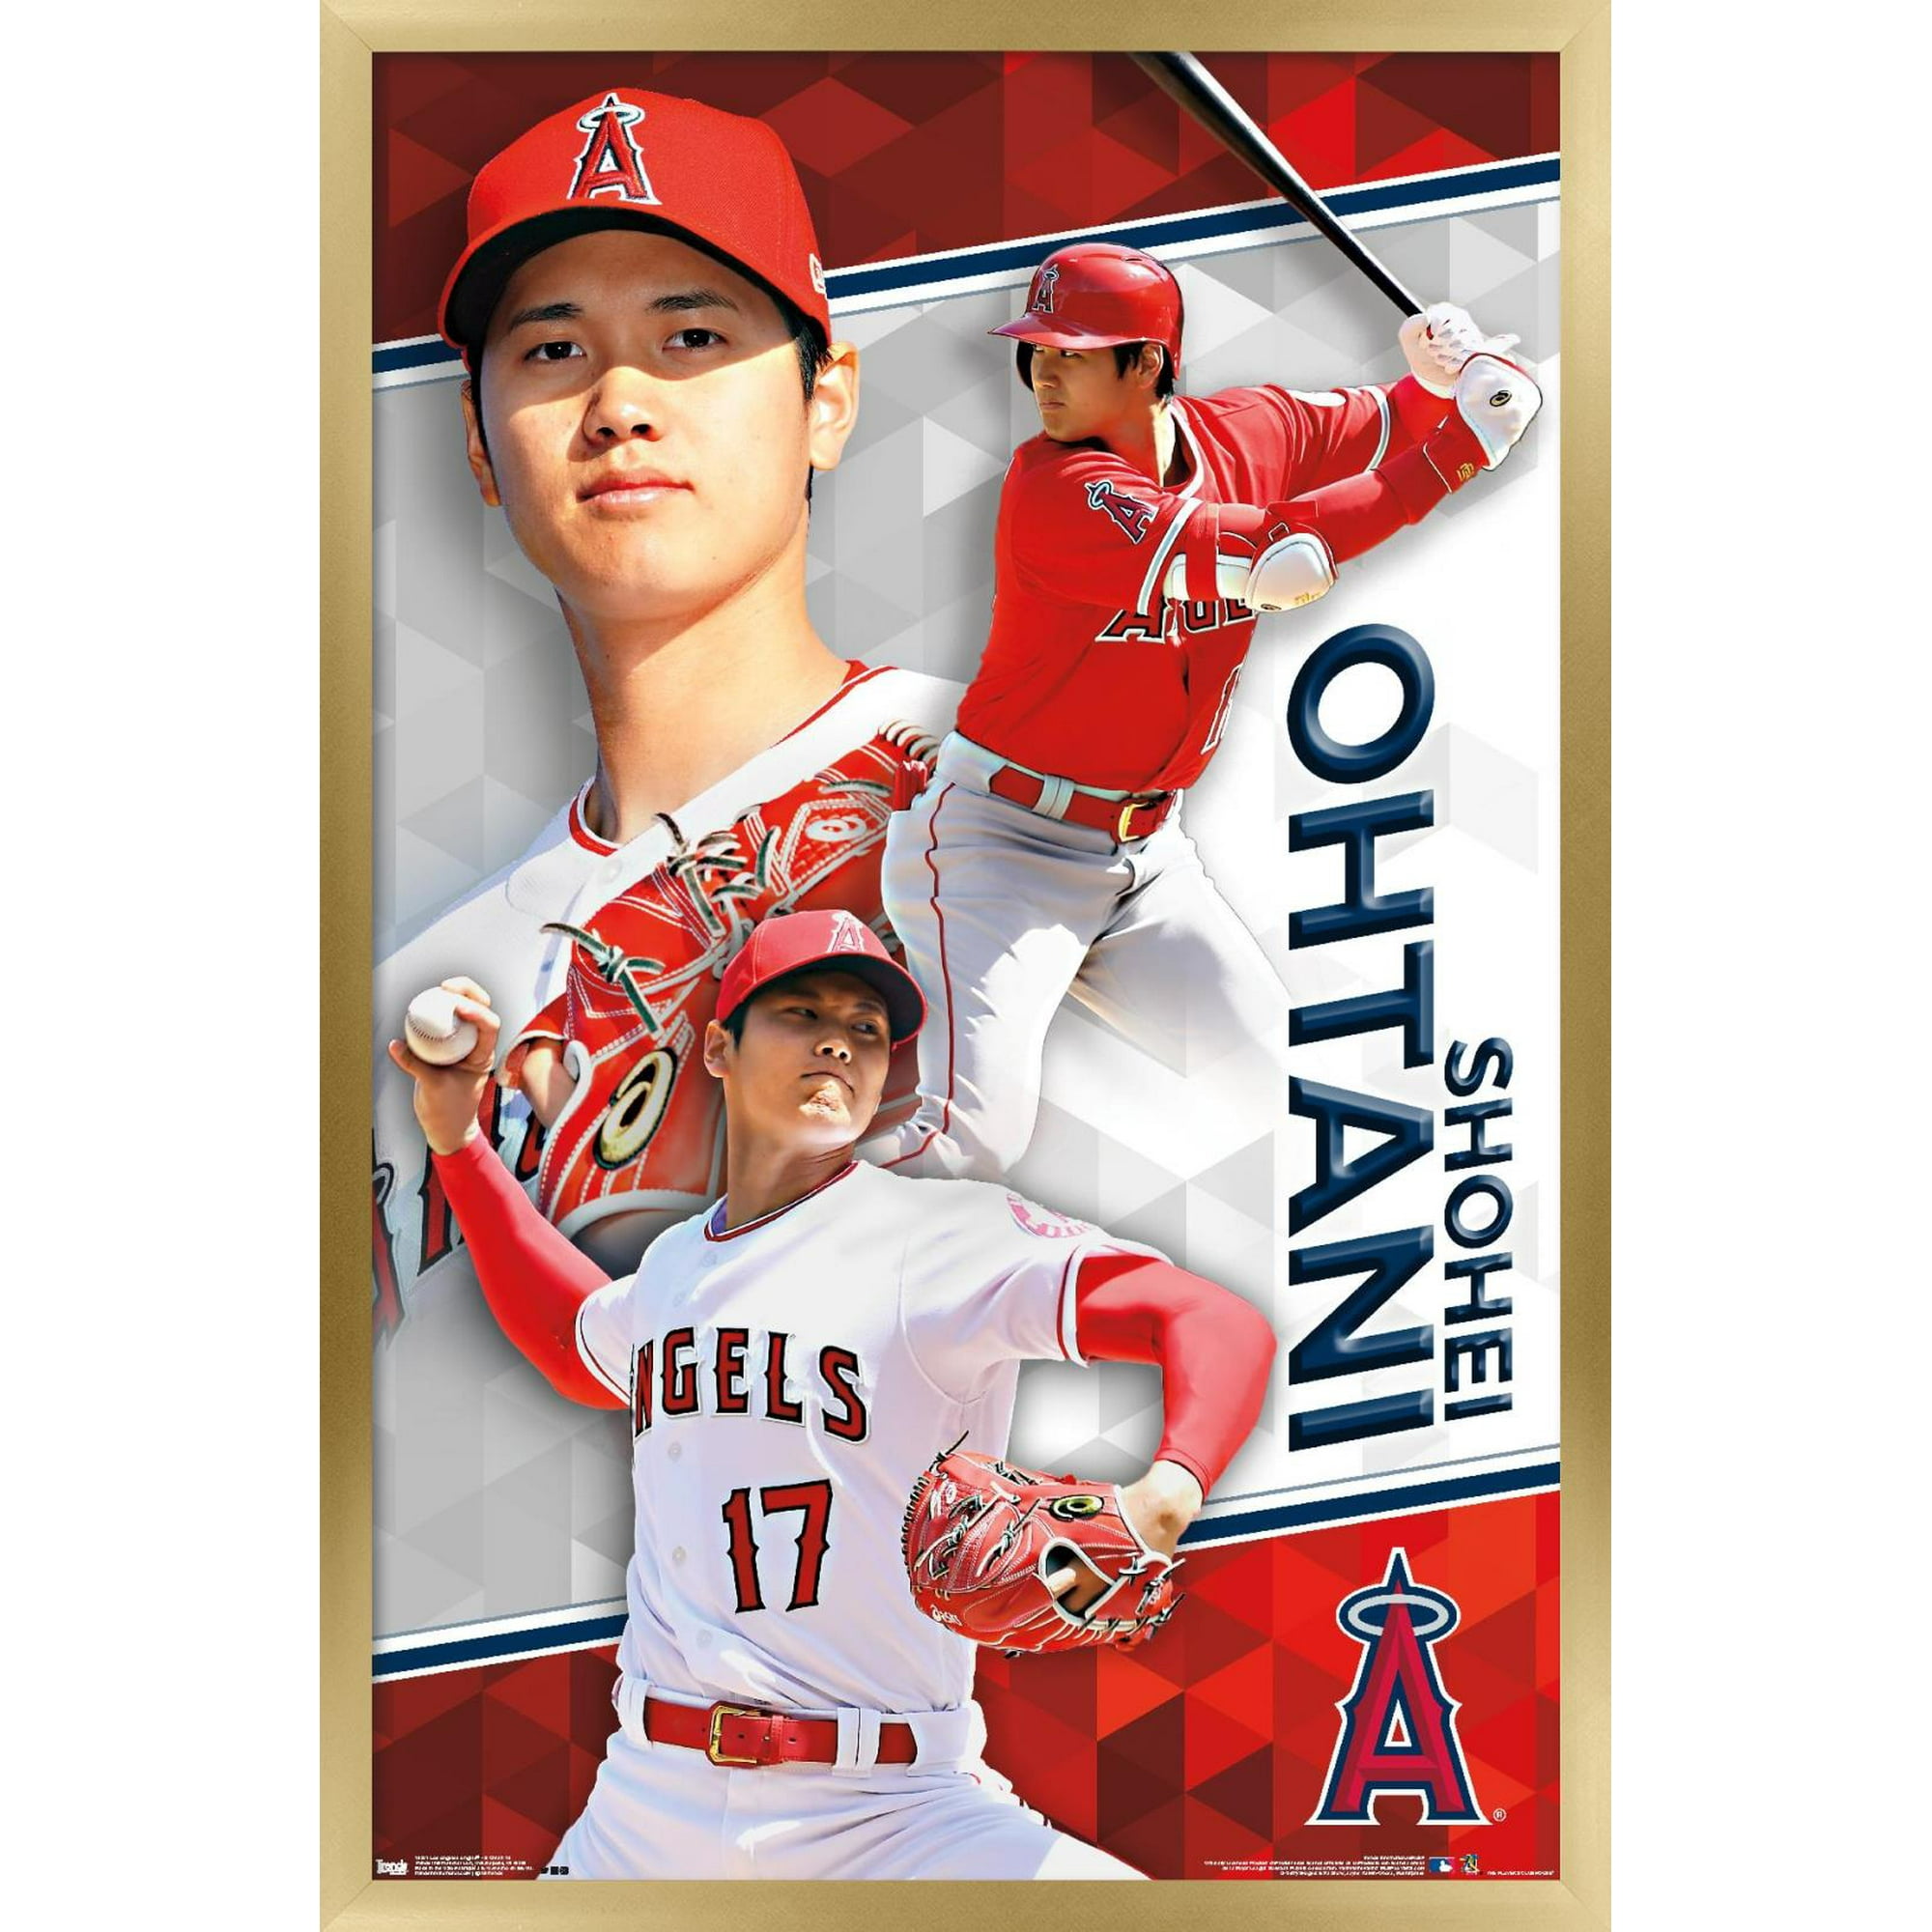 Shohei Ohtani Angels jersey: How to get Angels gear online